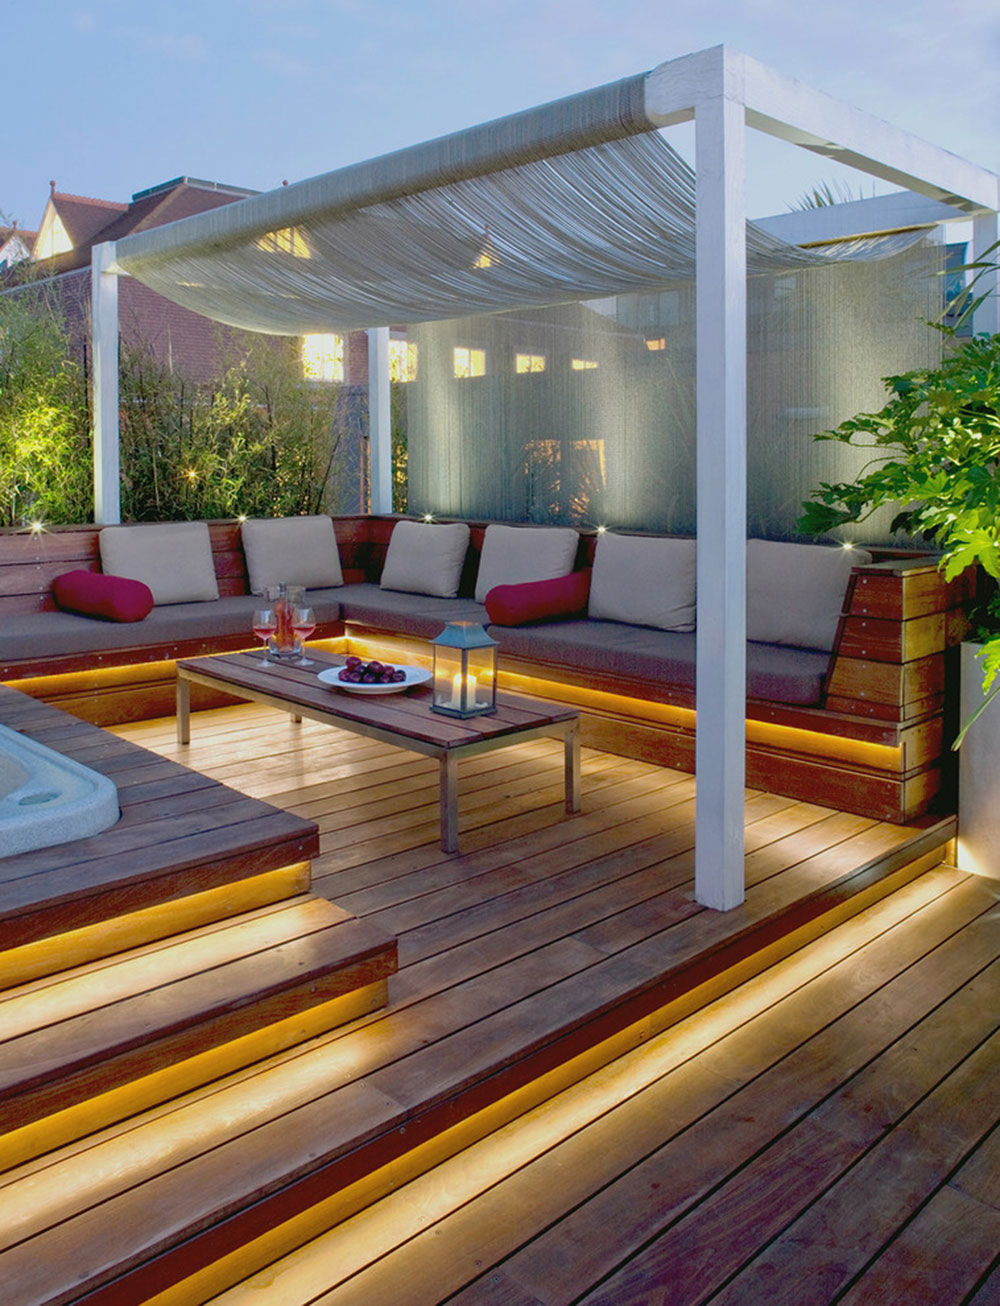 Bright-Your-Backyard-With-These-Deck-Lighting-Ideas4 Backyard Deck Lighting Ideas